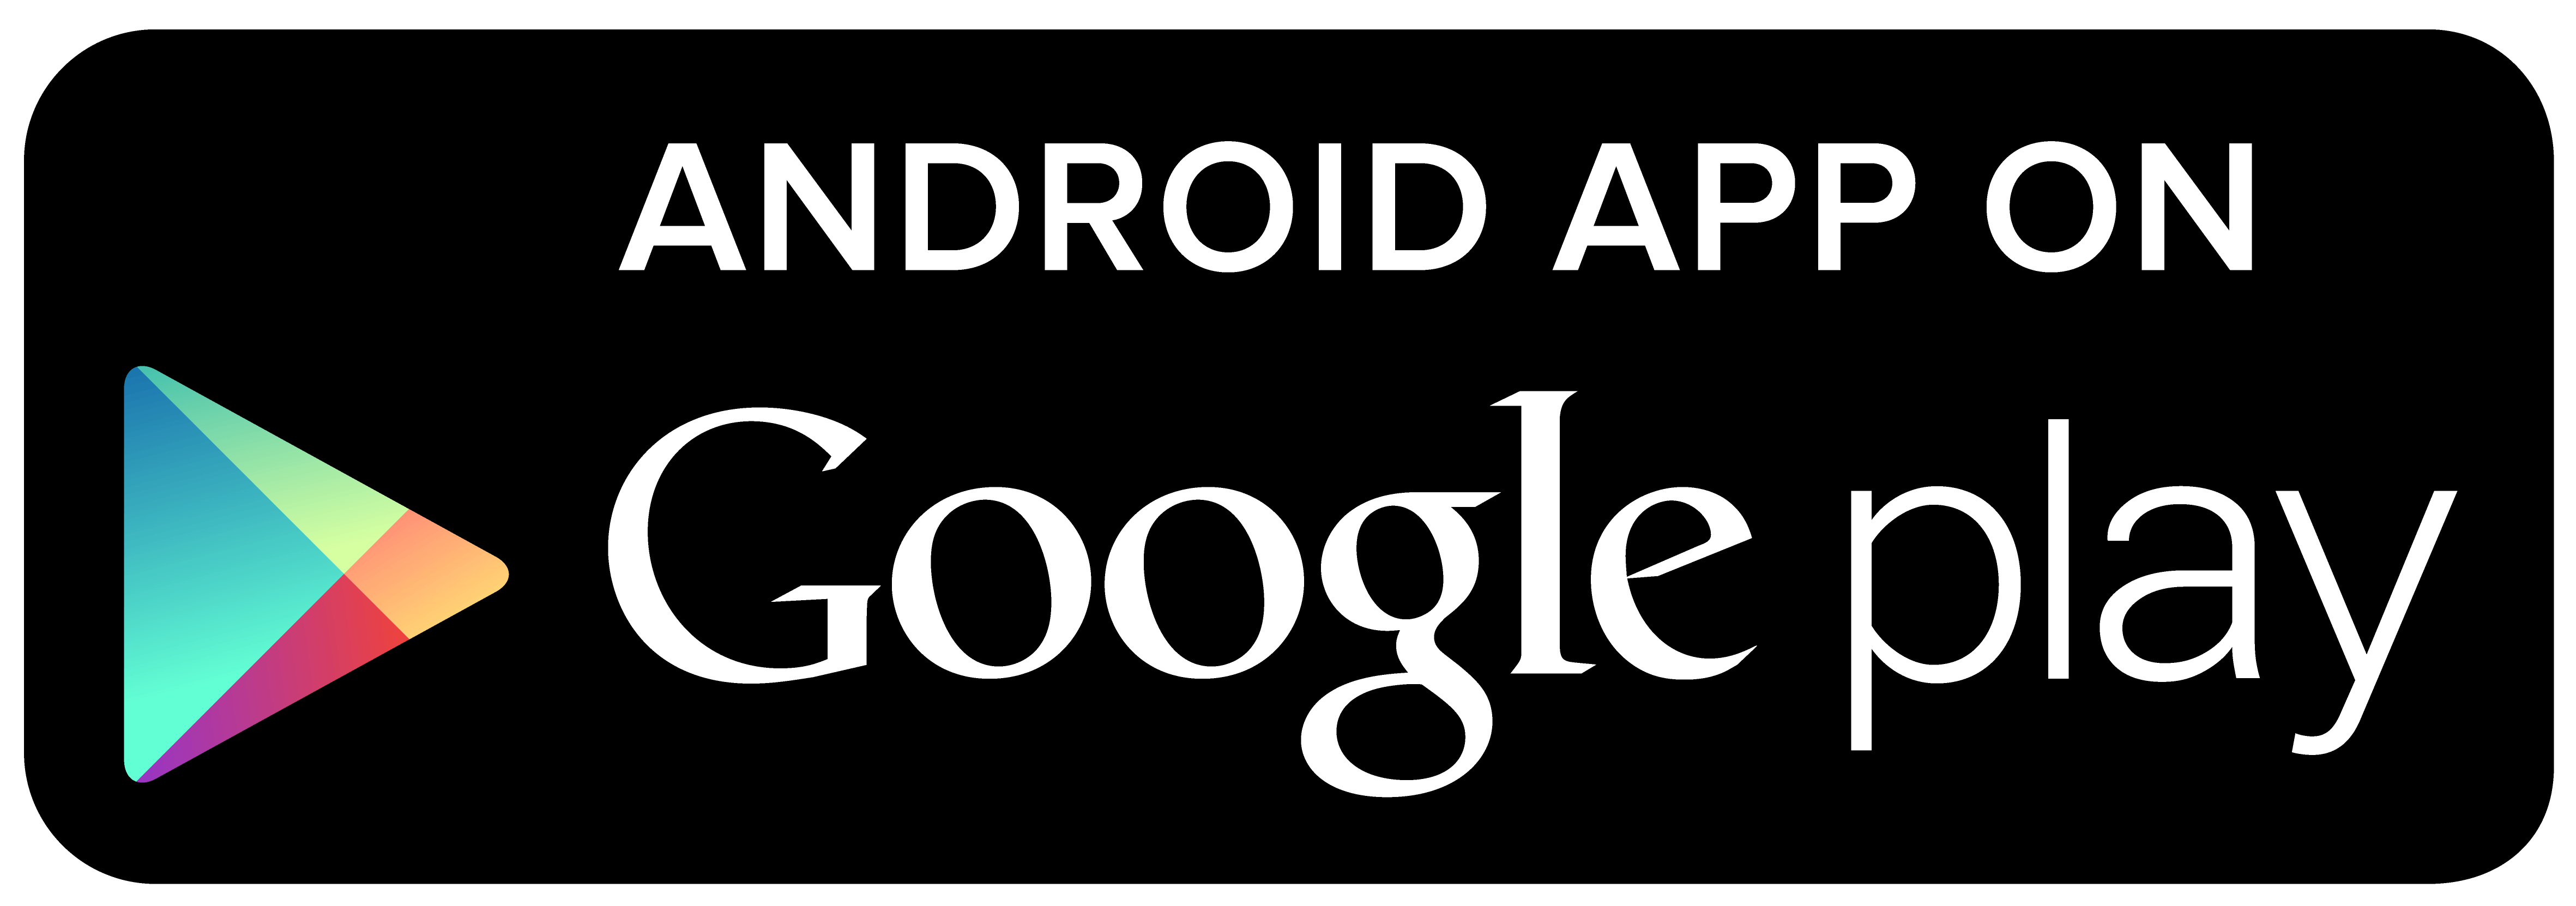 Android Google Play Store Logo Png